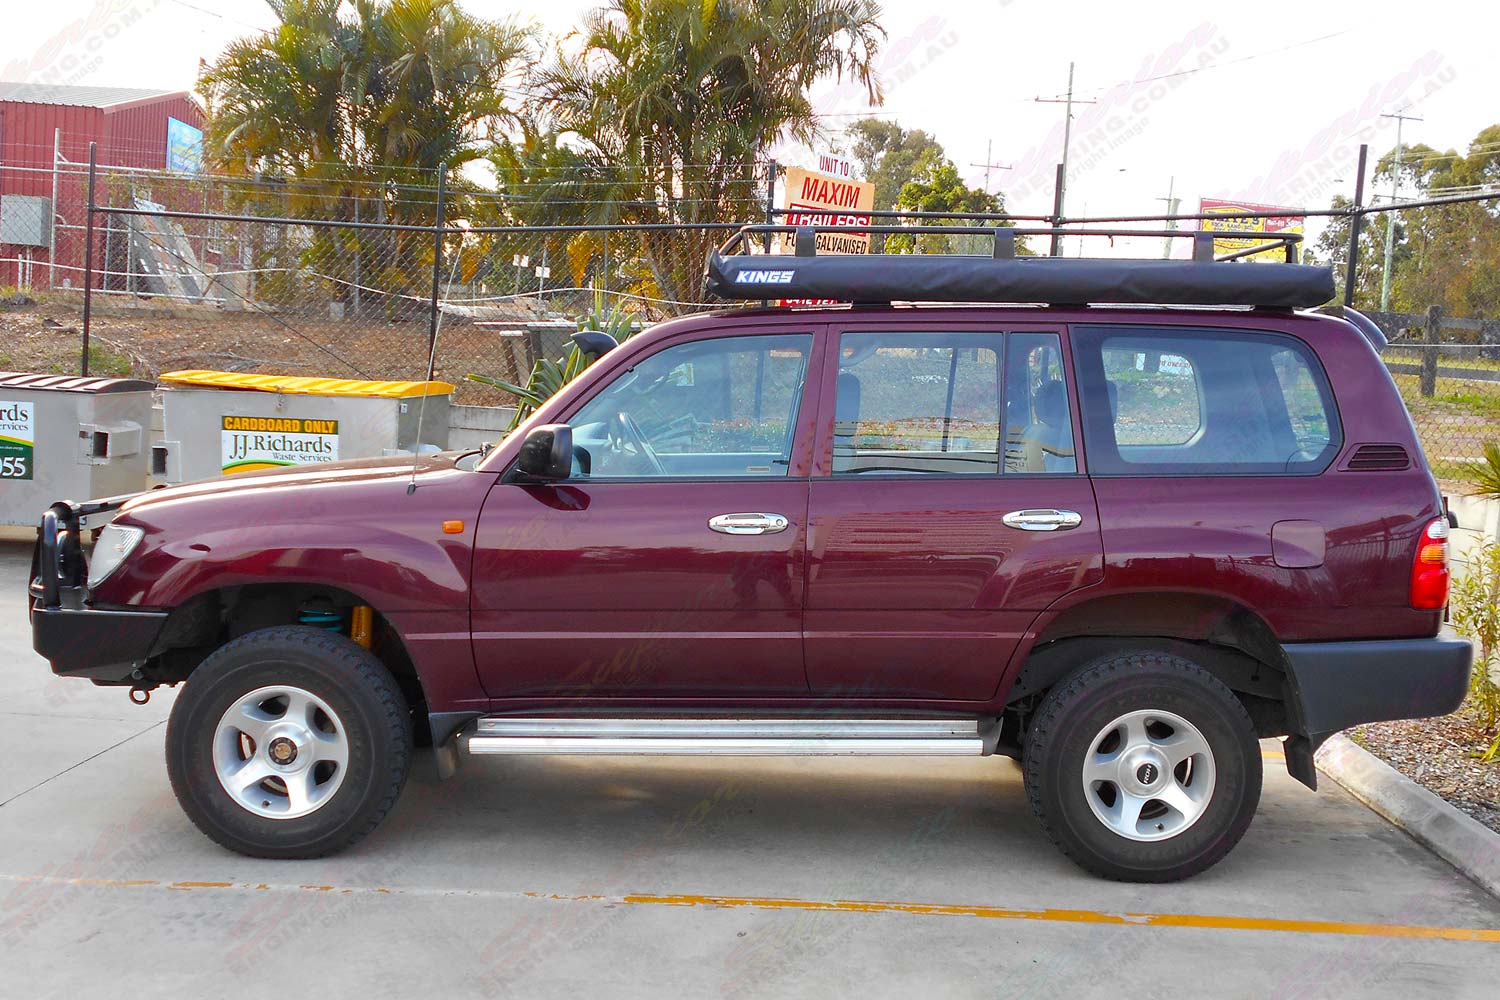 Left side view of a maroon 100 Series Toyota Landcruiser after being fitted with a heavy duty 2 inch Dobinsons 4x4 lift kit